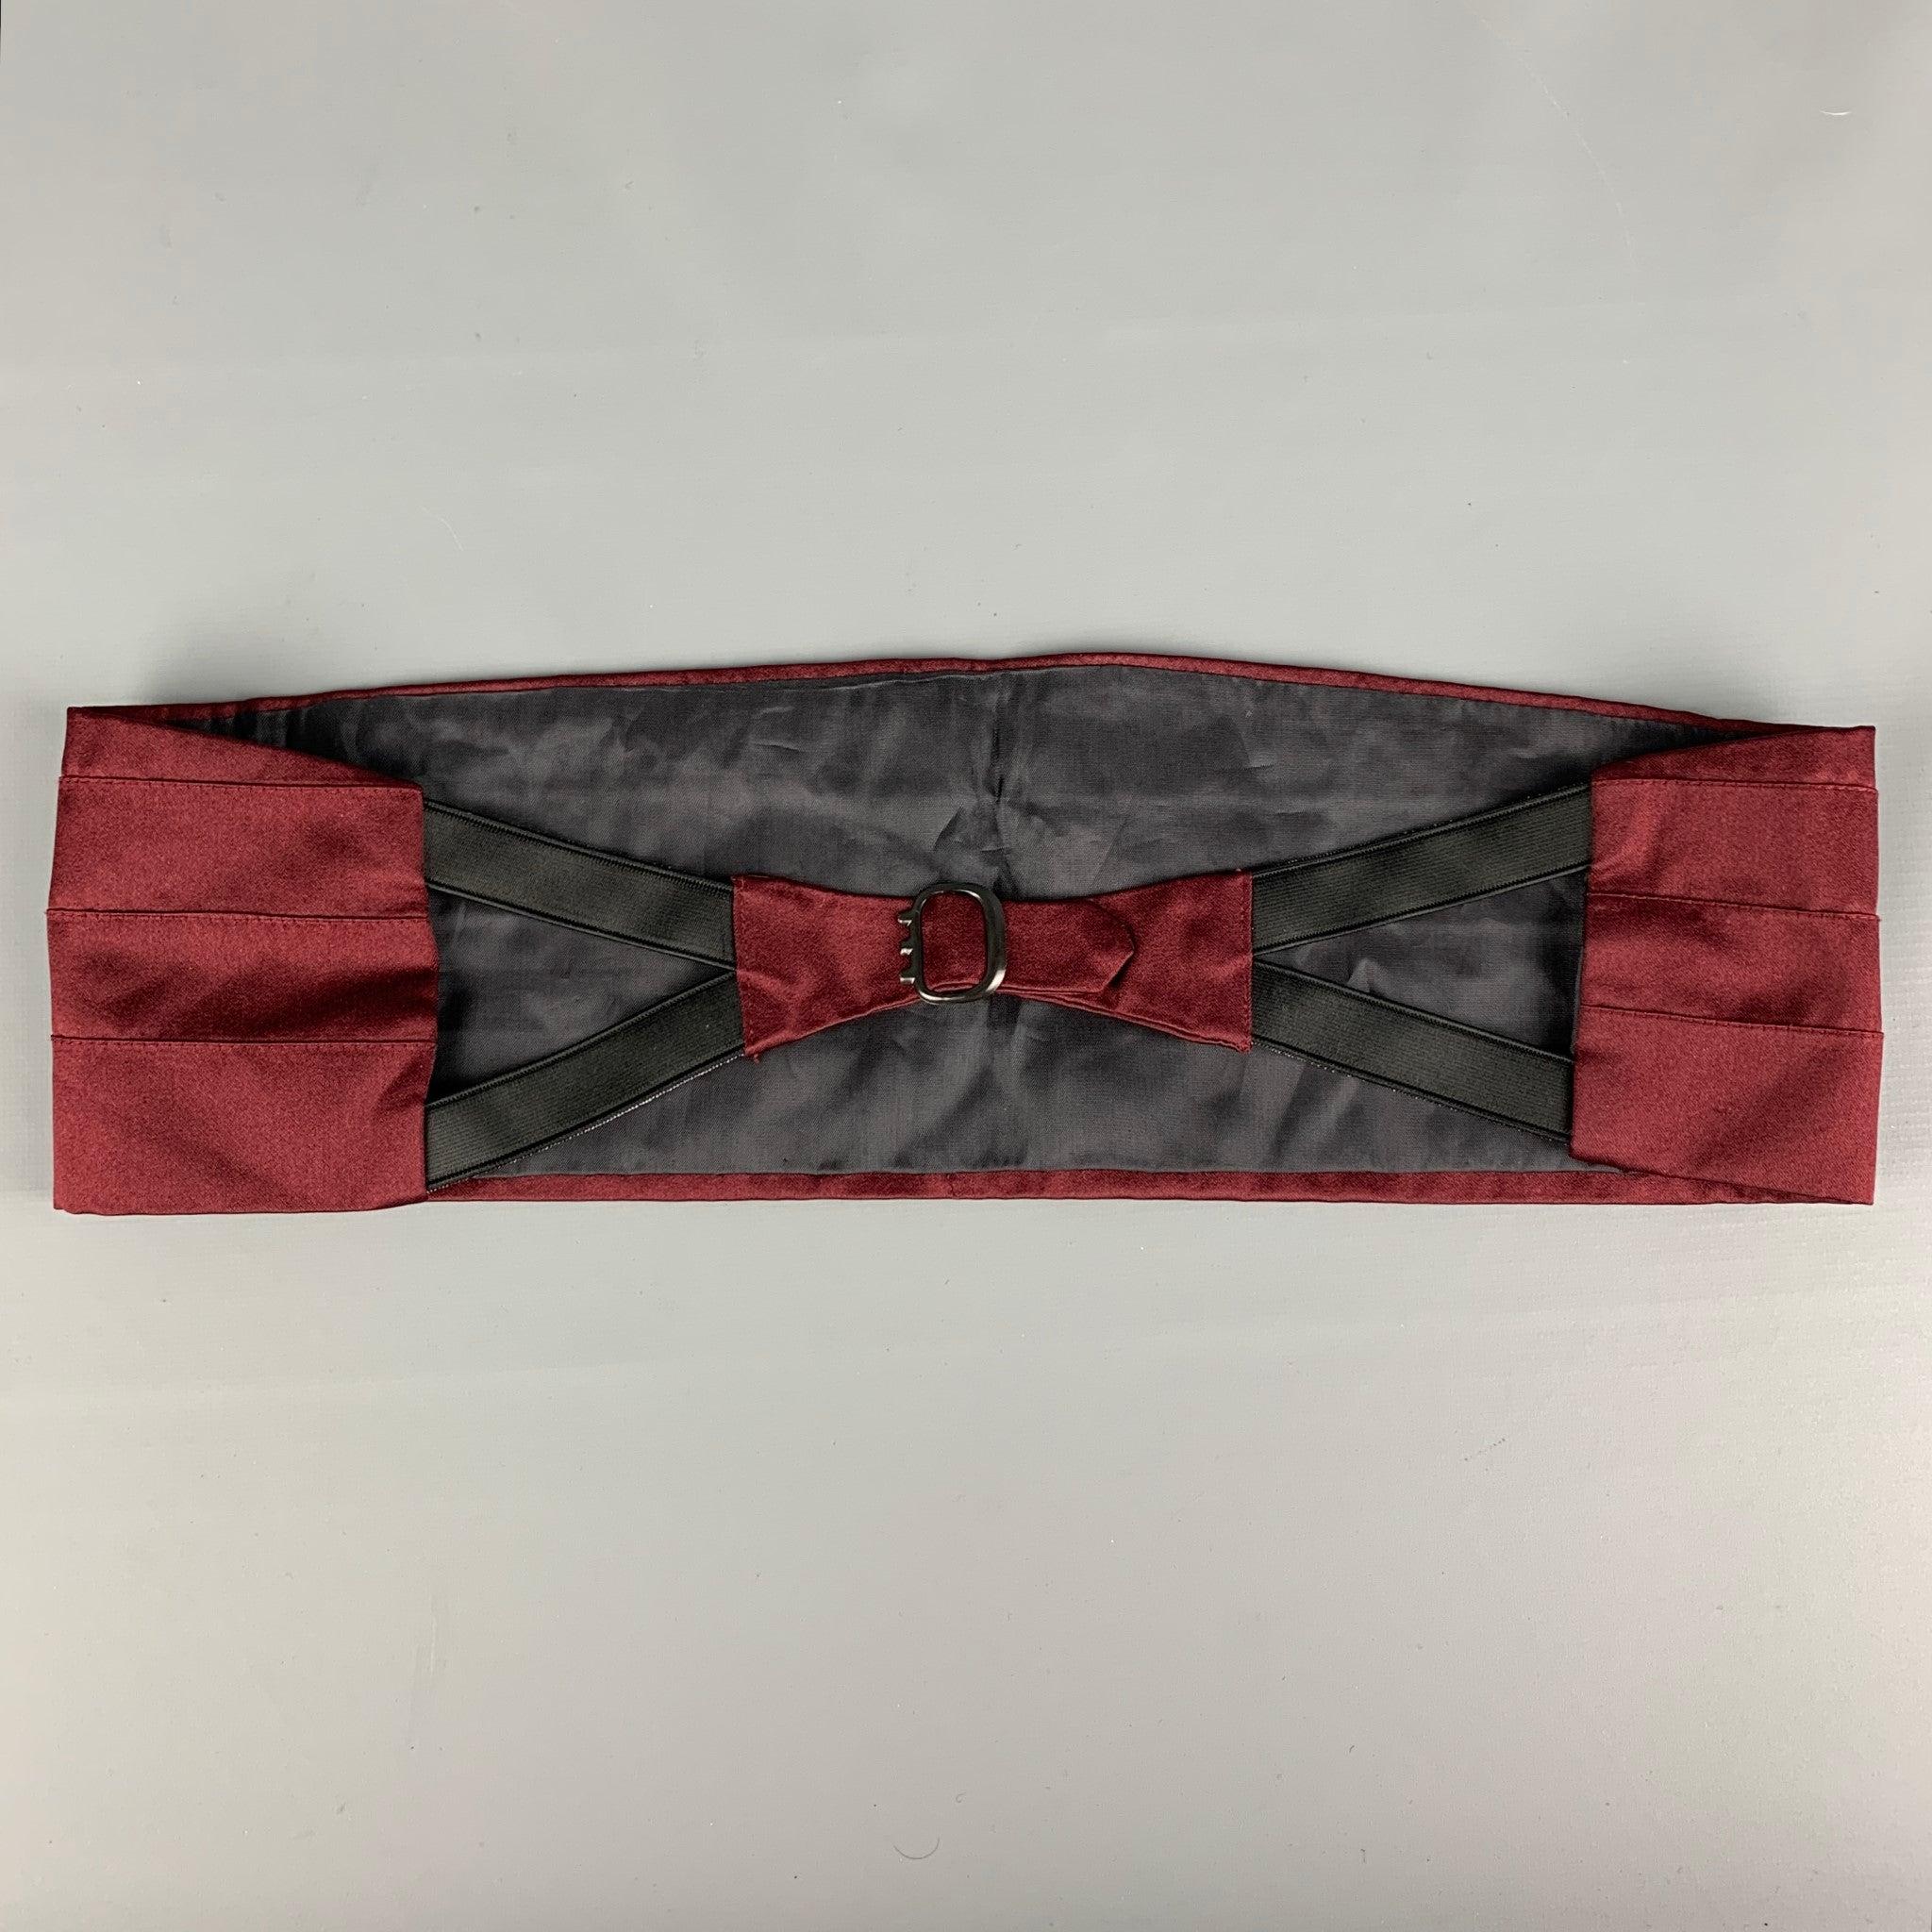 GIANNI VERSACE
cummerbund comes in a burgundy pleated silk featuring a buckle closure. Made in Italy.Very Good Pre-Owned Condition. 

Measurements: 
  Height: 4.5 inches Length: 33 inches 
  
  
 
Reference: 118897
Category: Cummerbund
More Details
